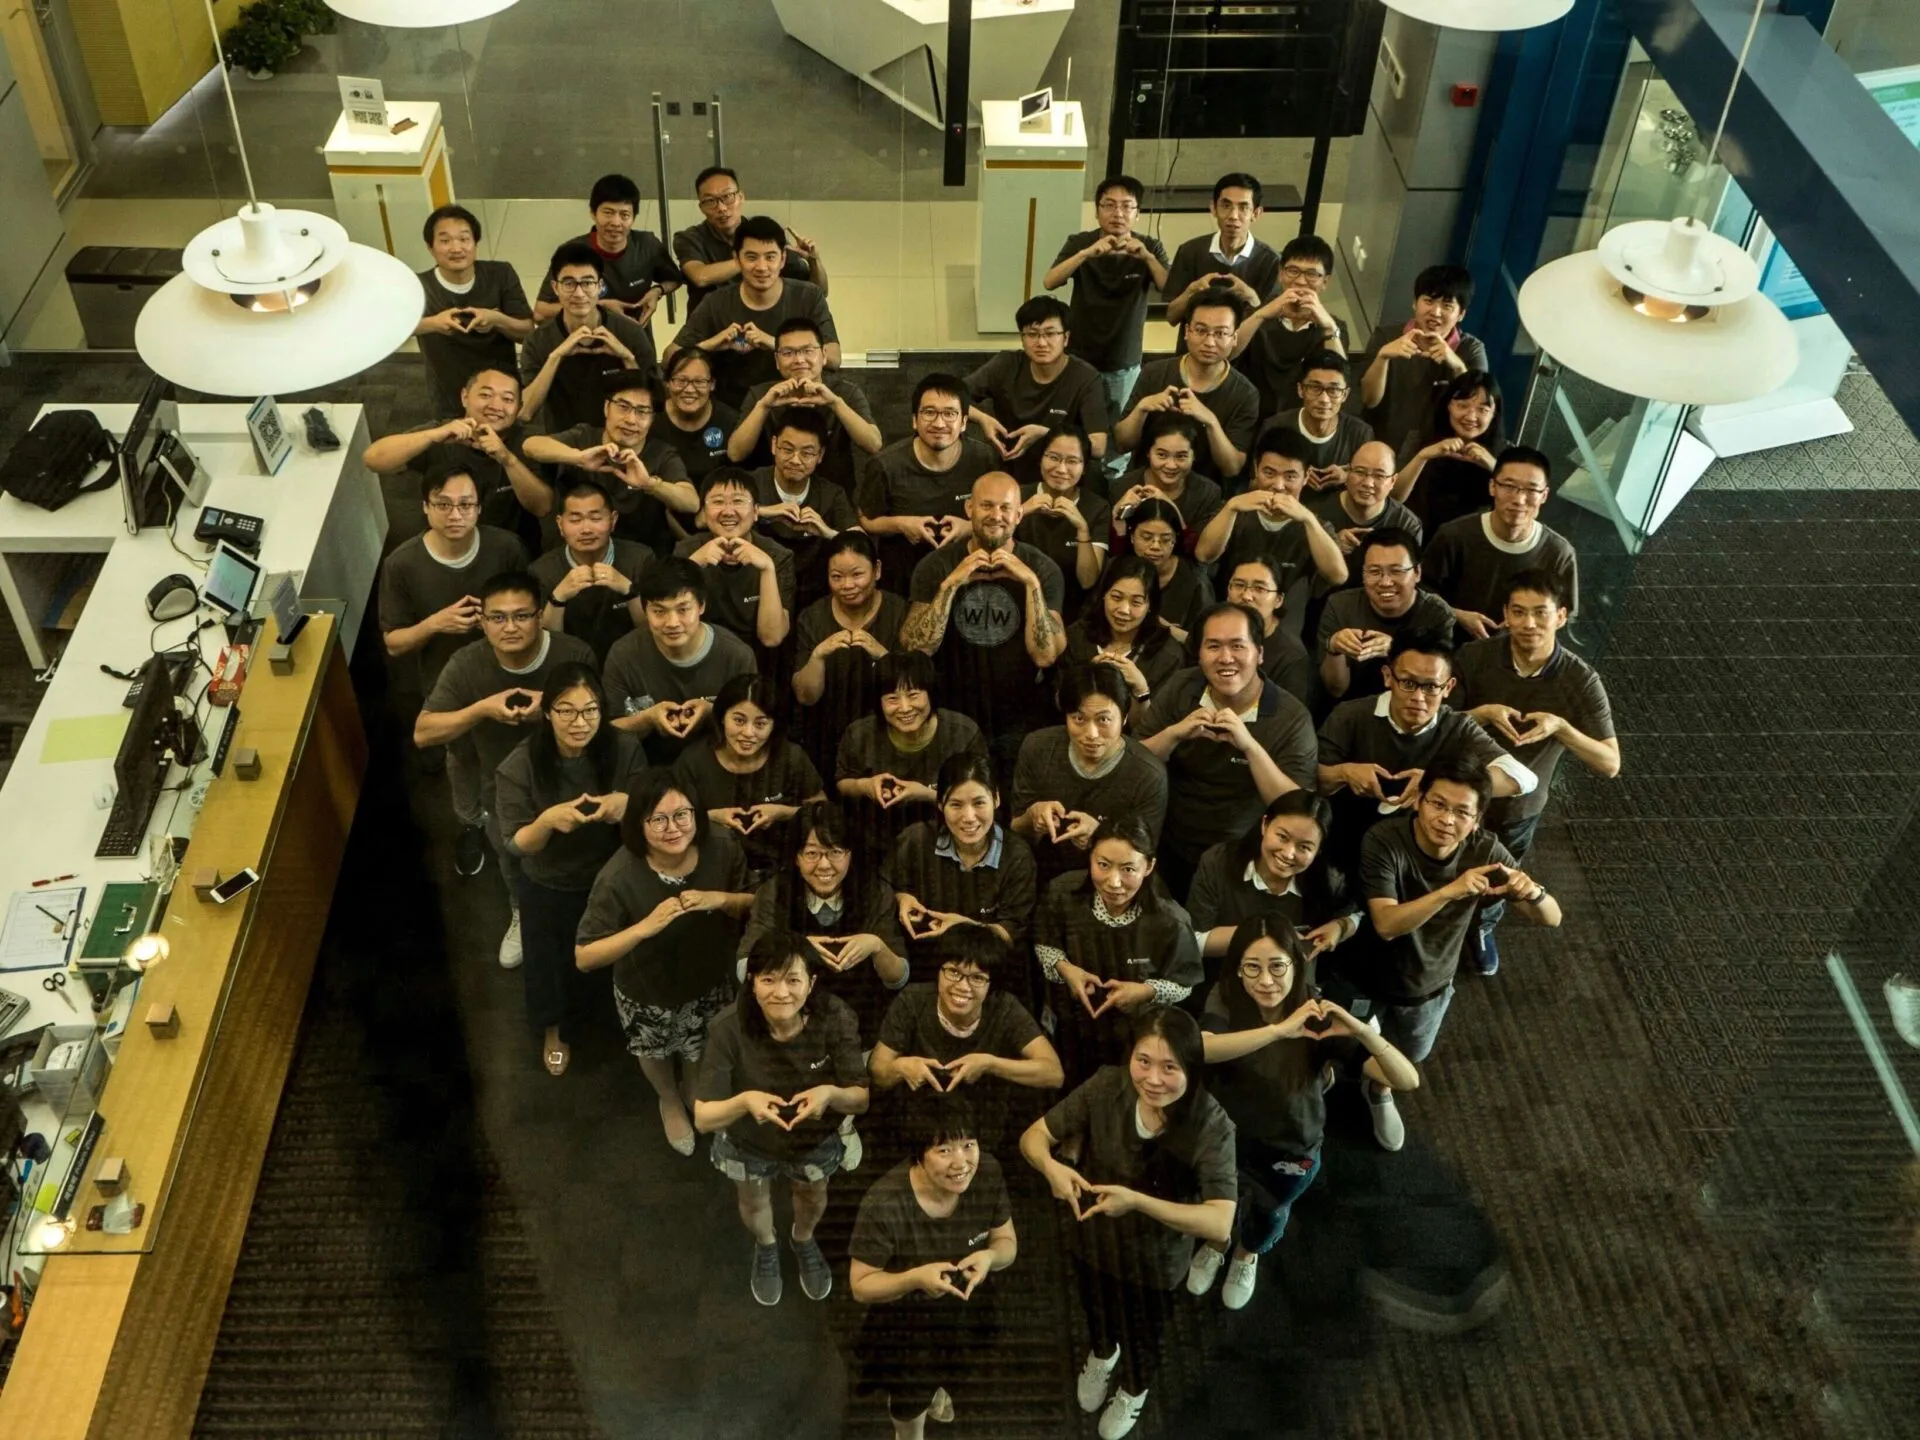 The “boomerang” effect: Former Autodeskers in Shanghai share why they returned to work at Autodesk